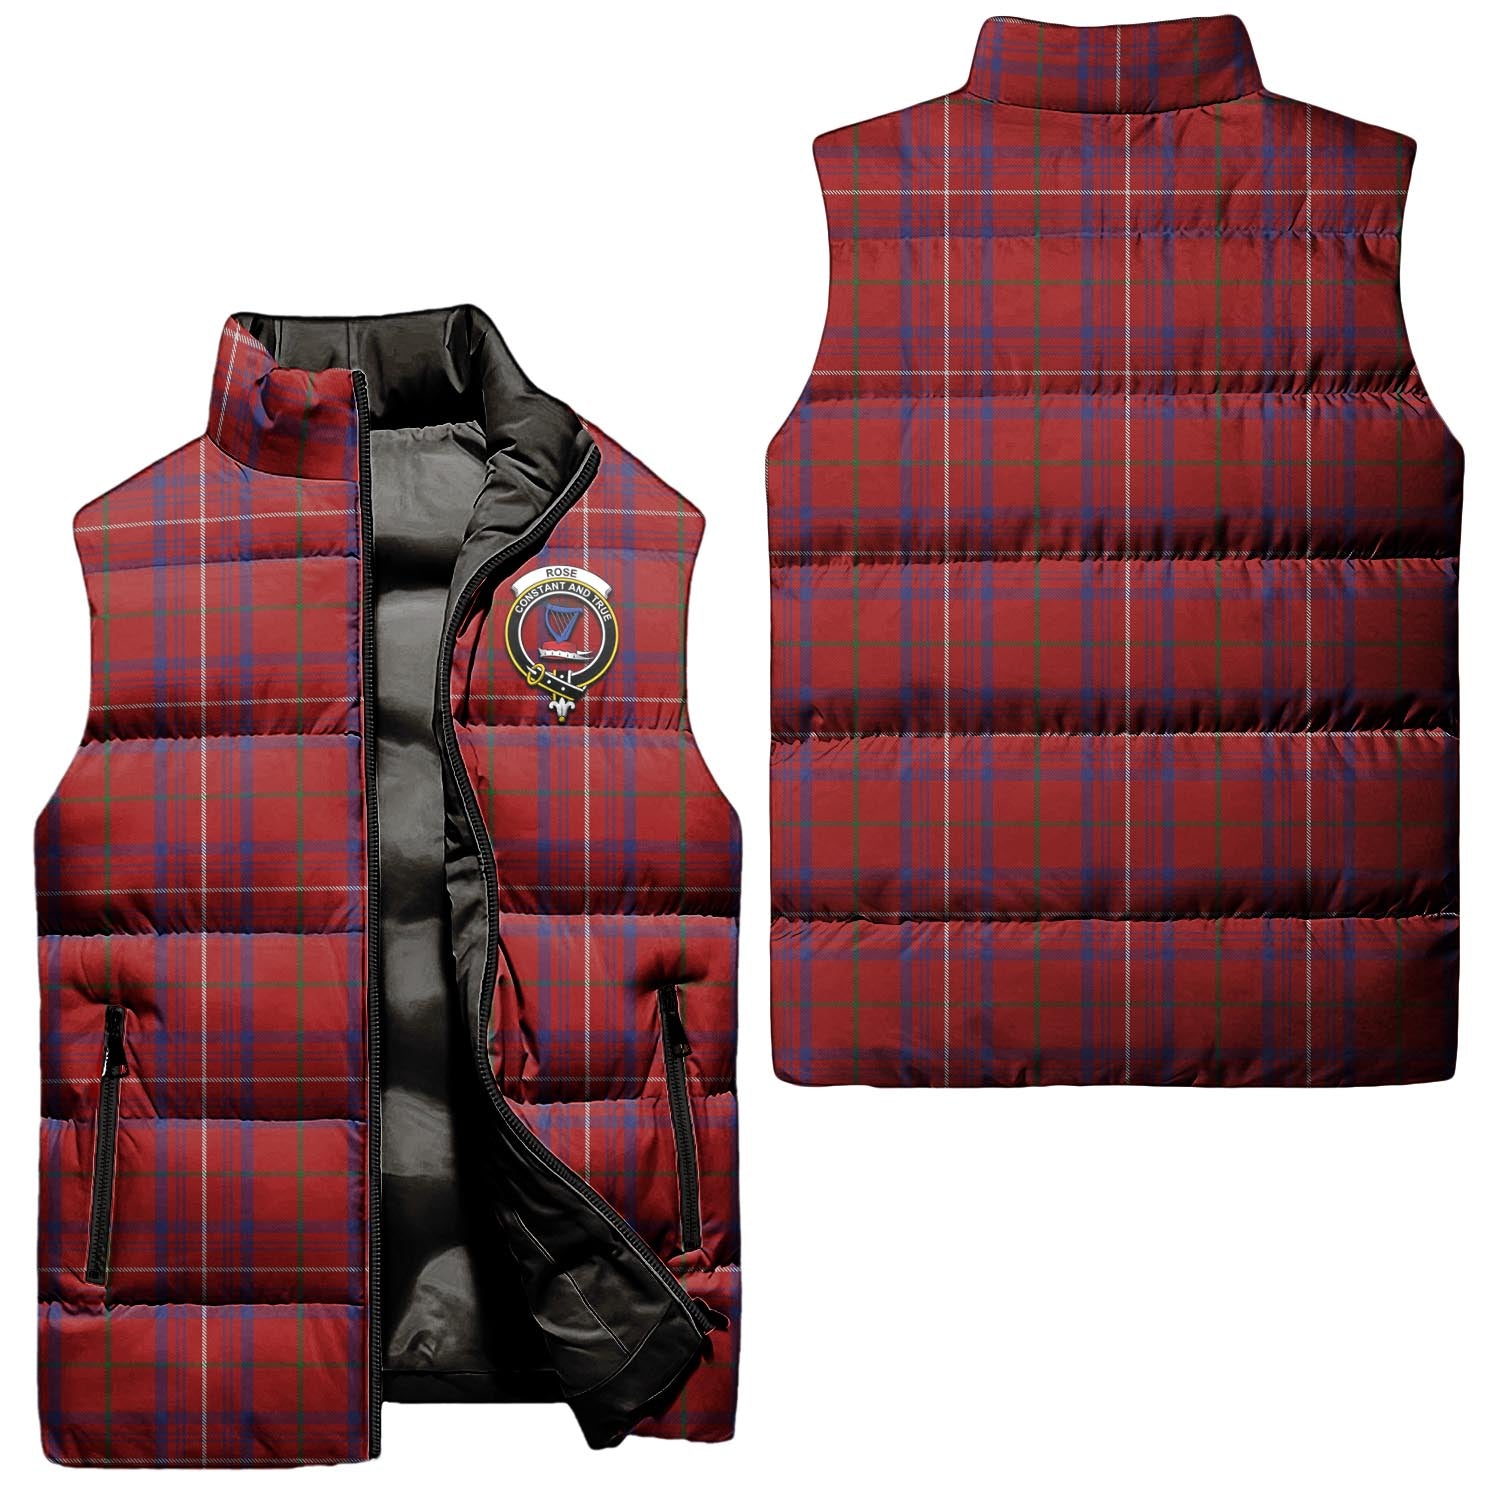 rose-clan-puffer-vest-family-crest-plaid-sleeveless-down-jacket